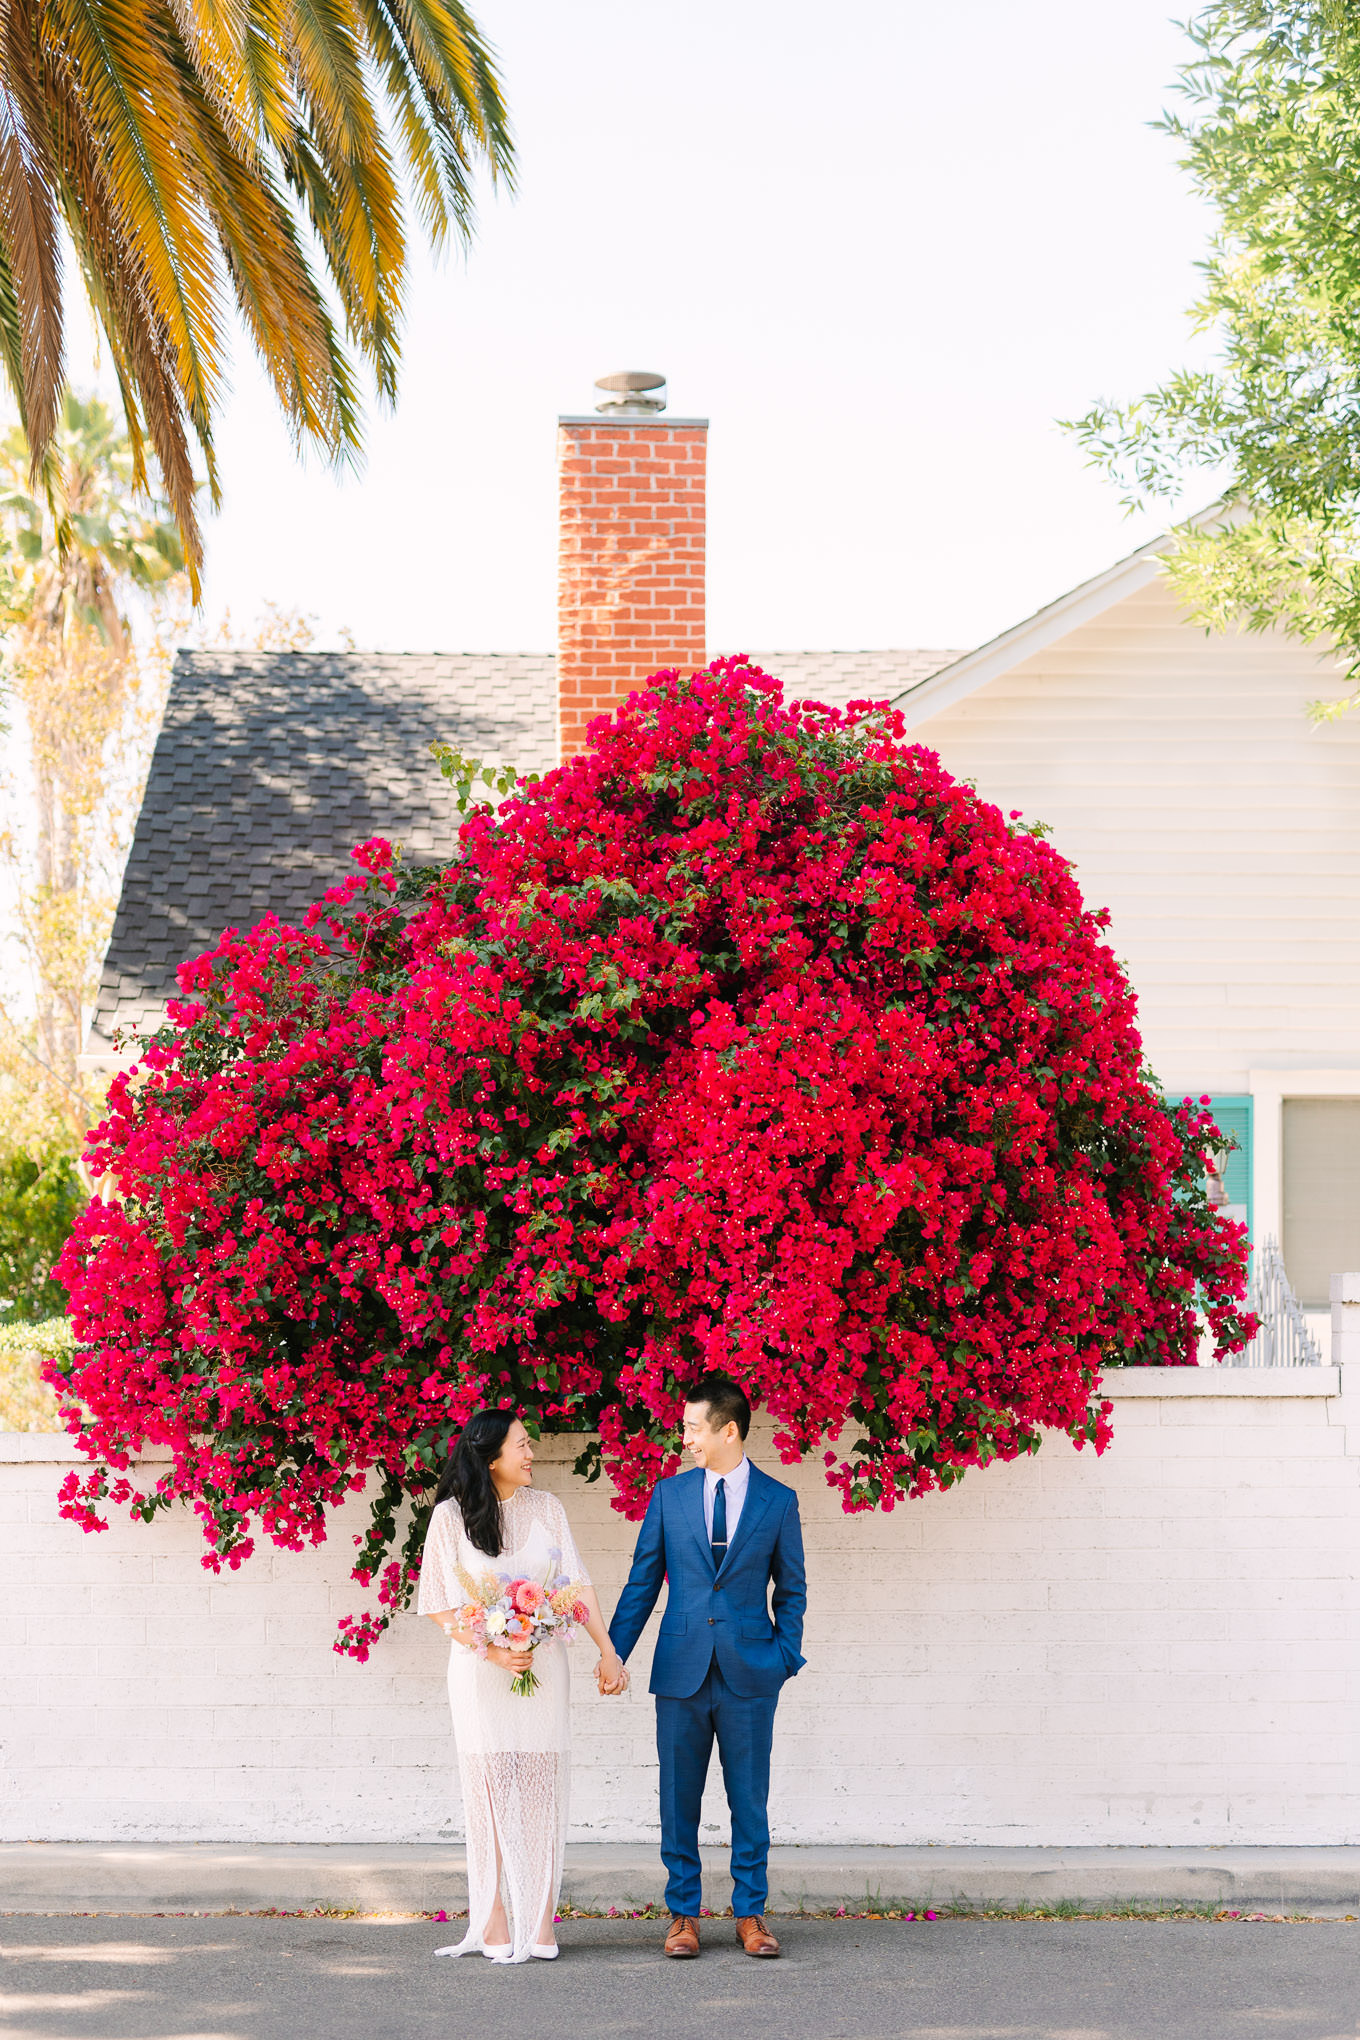 Toluca Lake bougainvillea elopement | Wedding and elopement photography roundup | Los Angeles and Palm Springs photographer | #losangeleswedding #palmspringswedding #elopementphotographer Source: Mary Costa Photography | Los Angeles